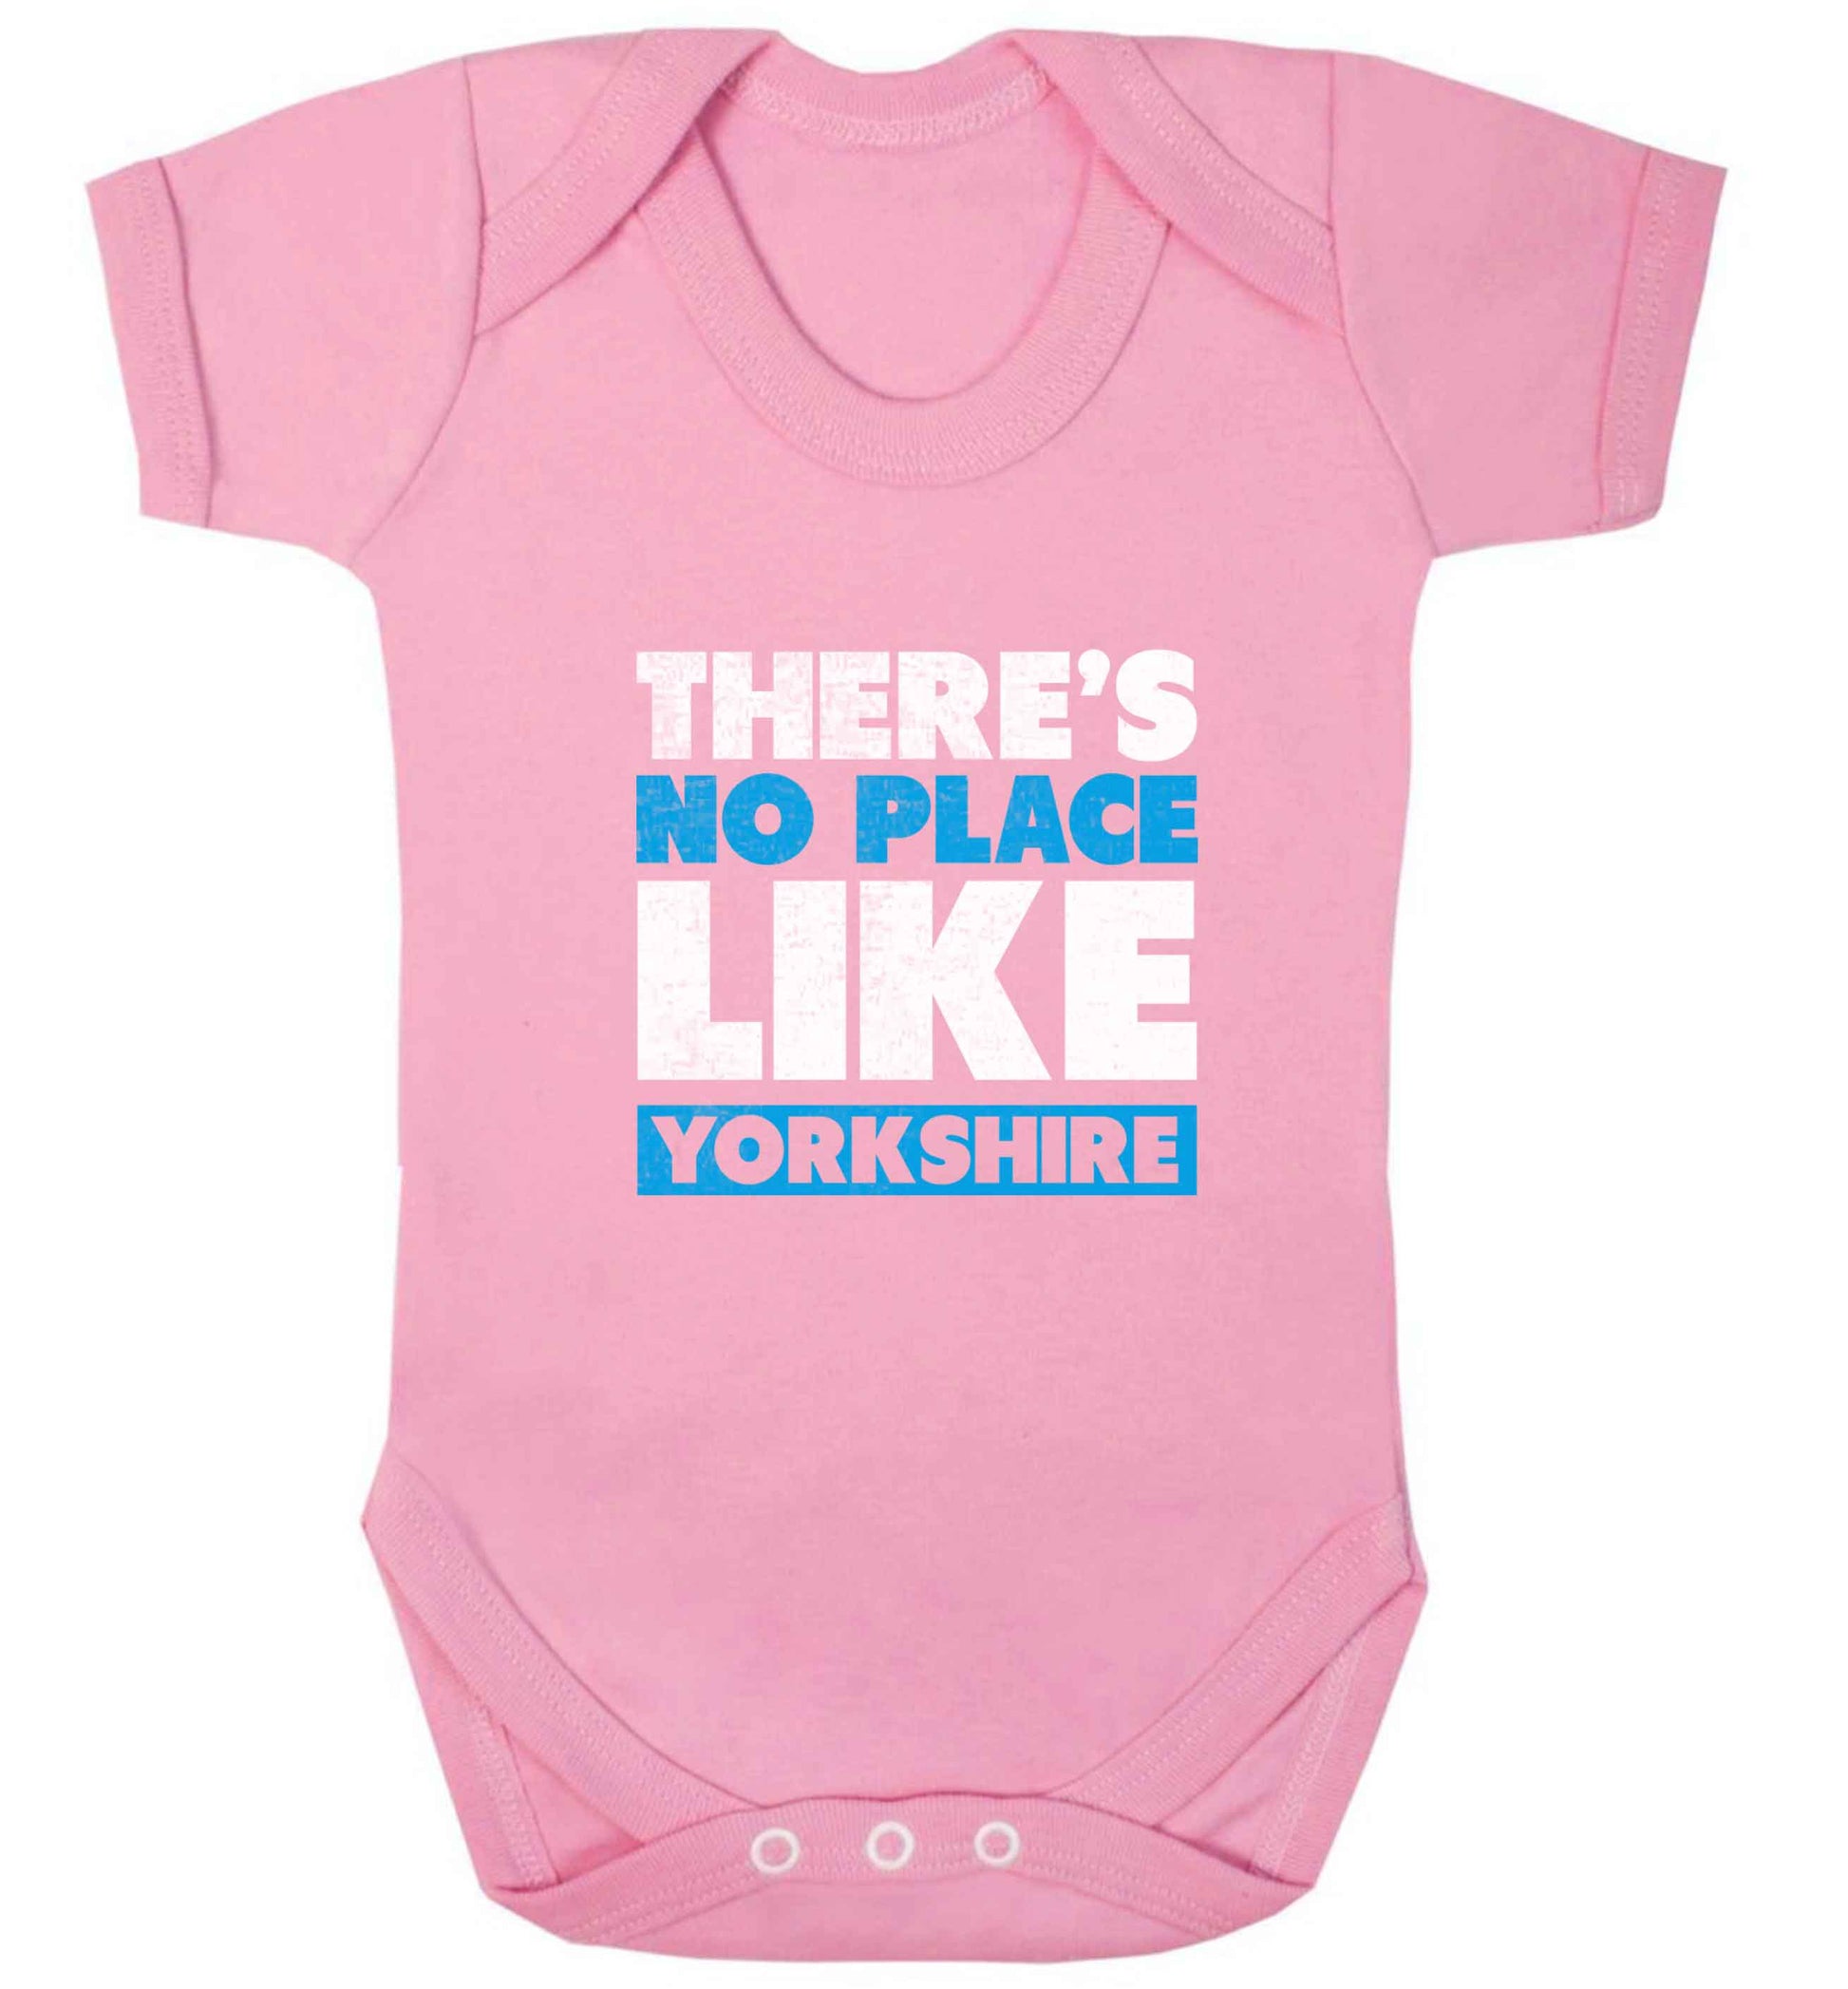 There's no place like Yorkshire baby vest pale pink 18-24 months